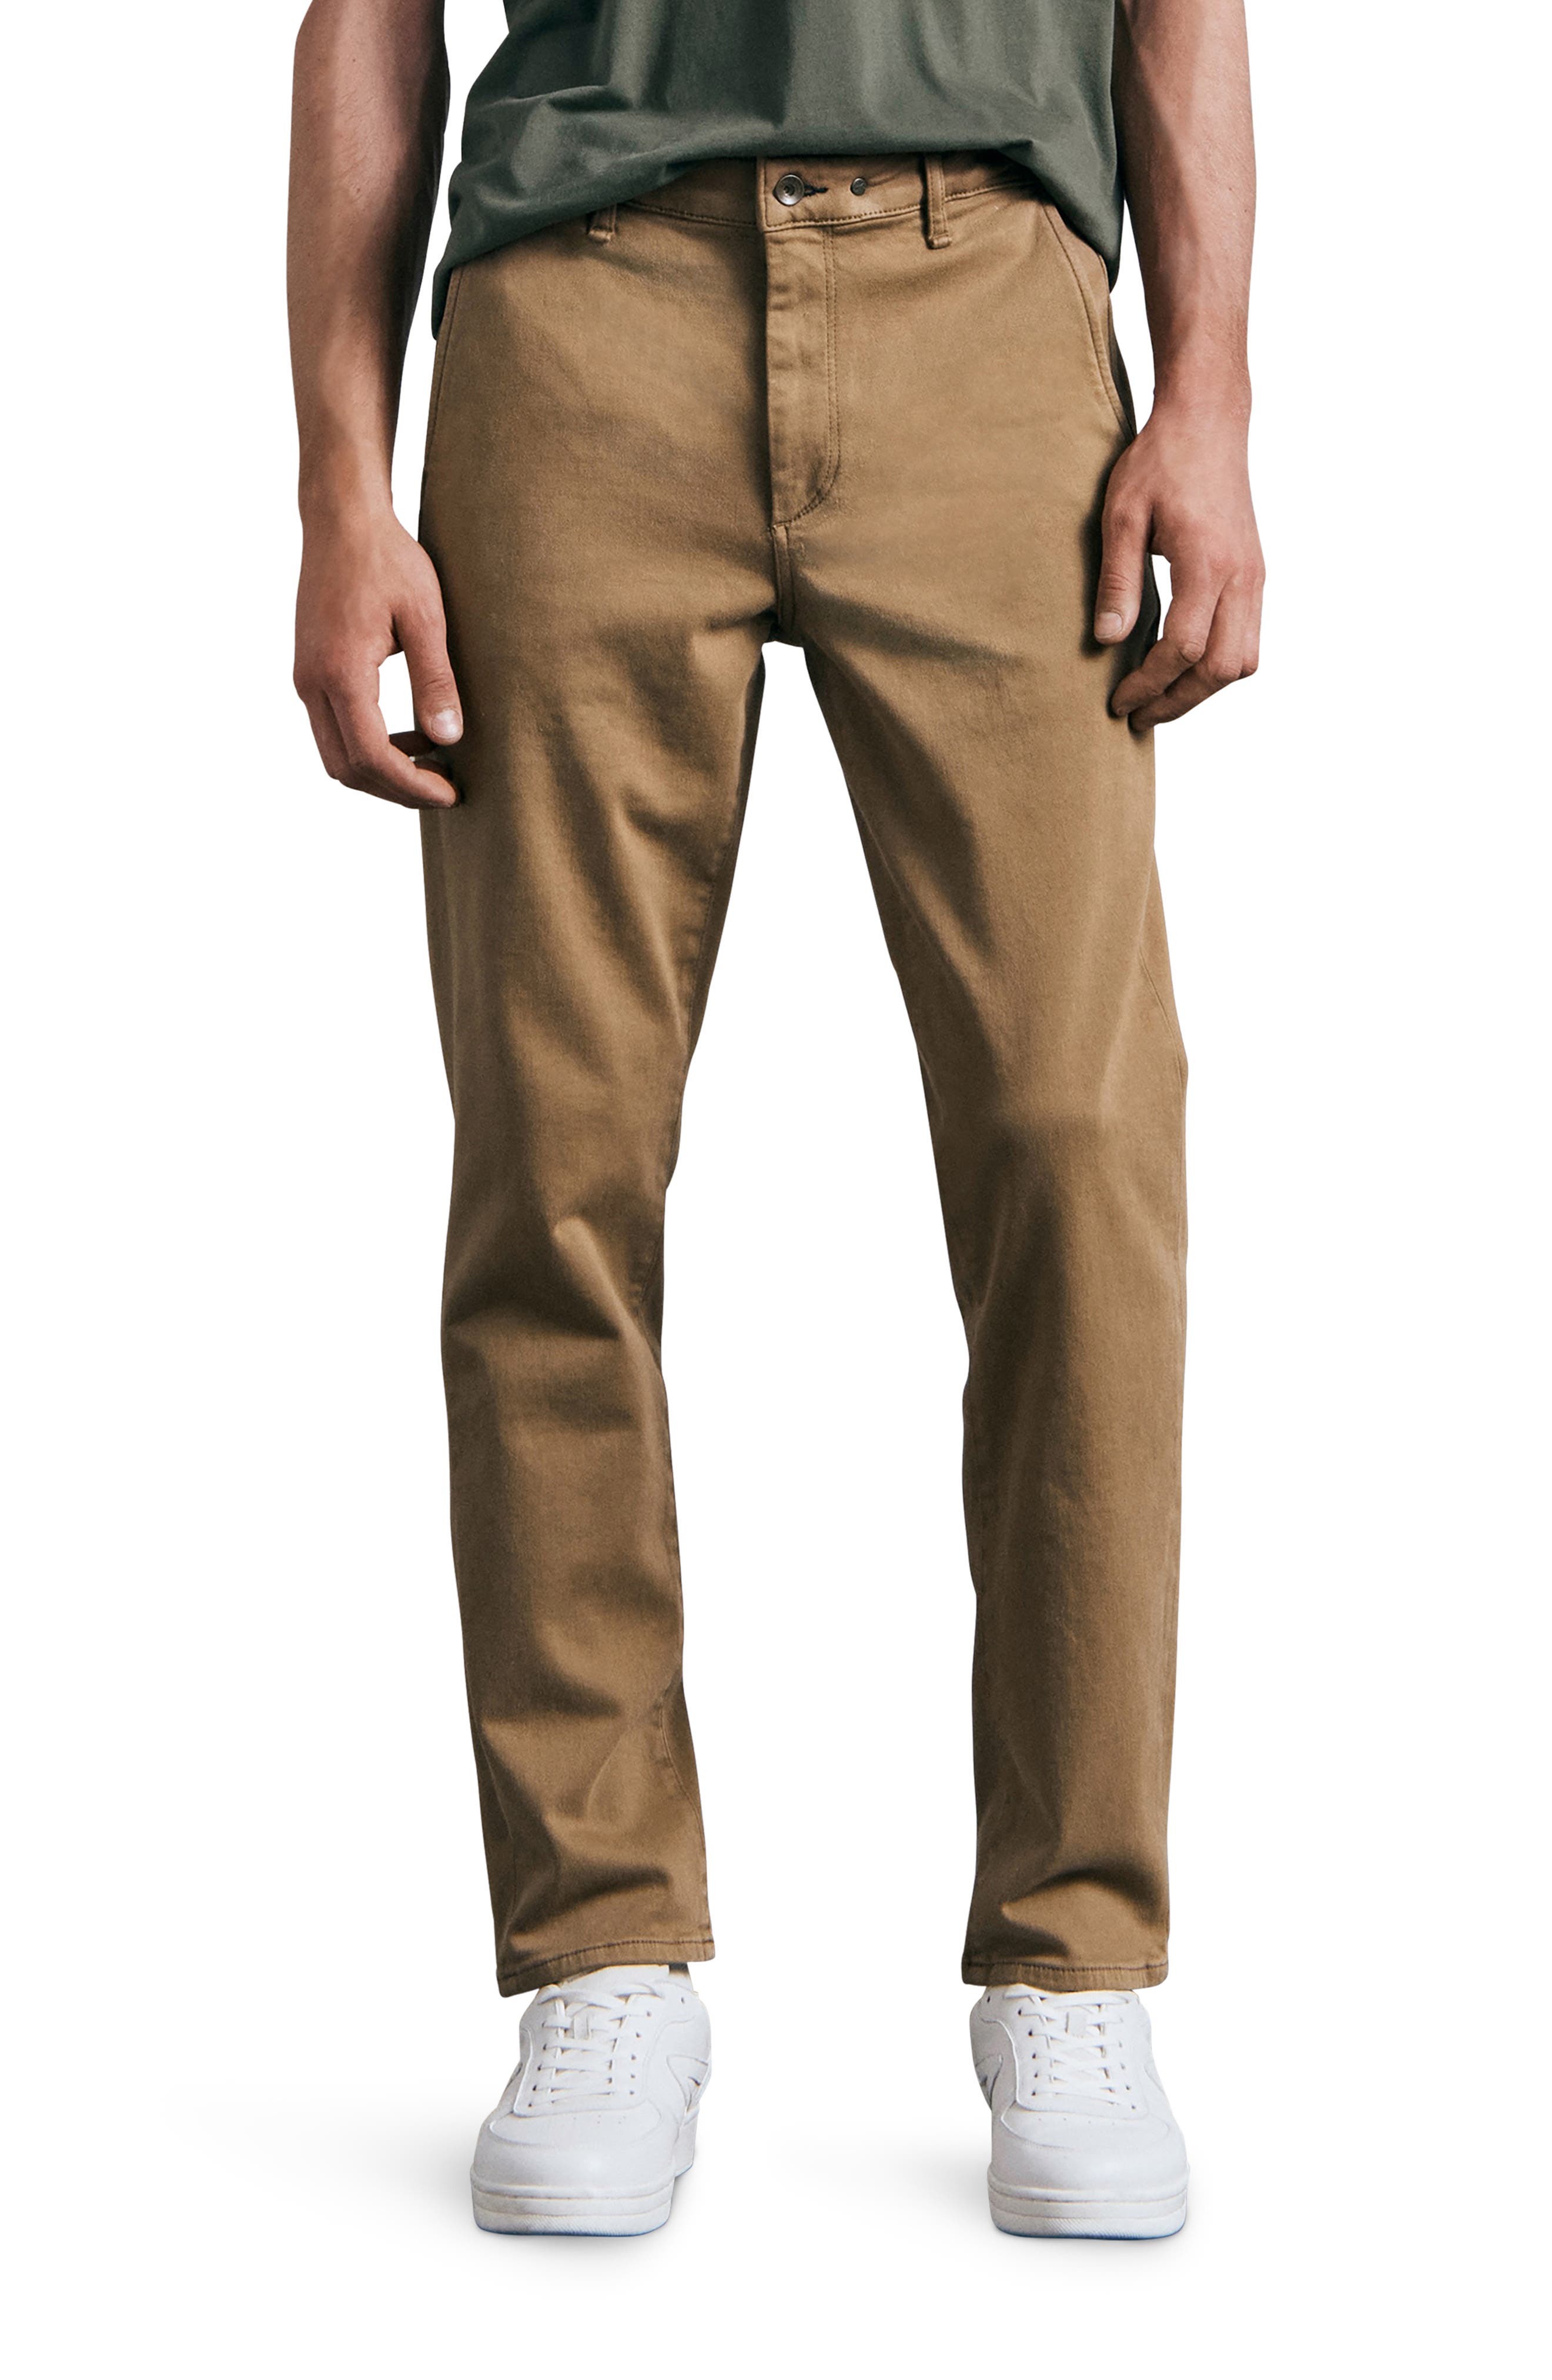 Slacks and Chinos Department 5 Trousers Department 5 Cotton Trouser in Black for Men Slacks and Chinos Mens Trousers 